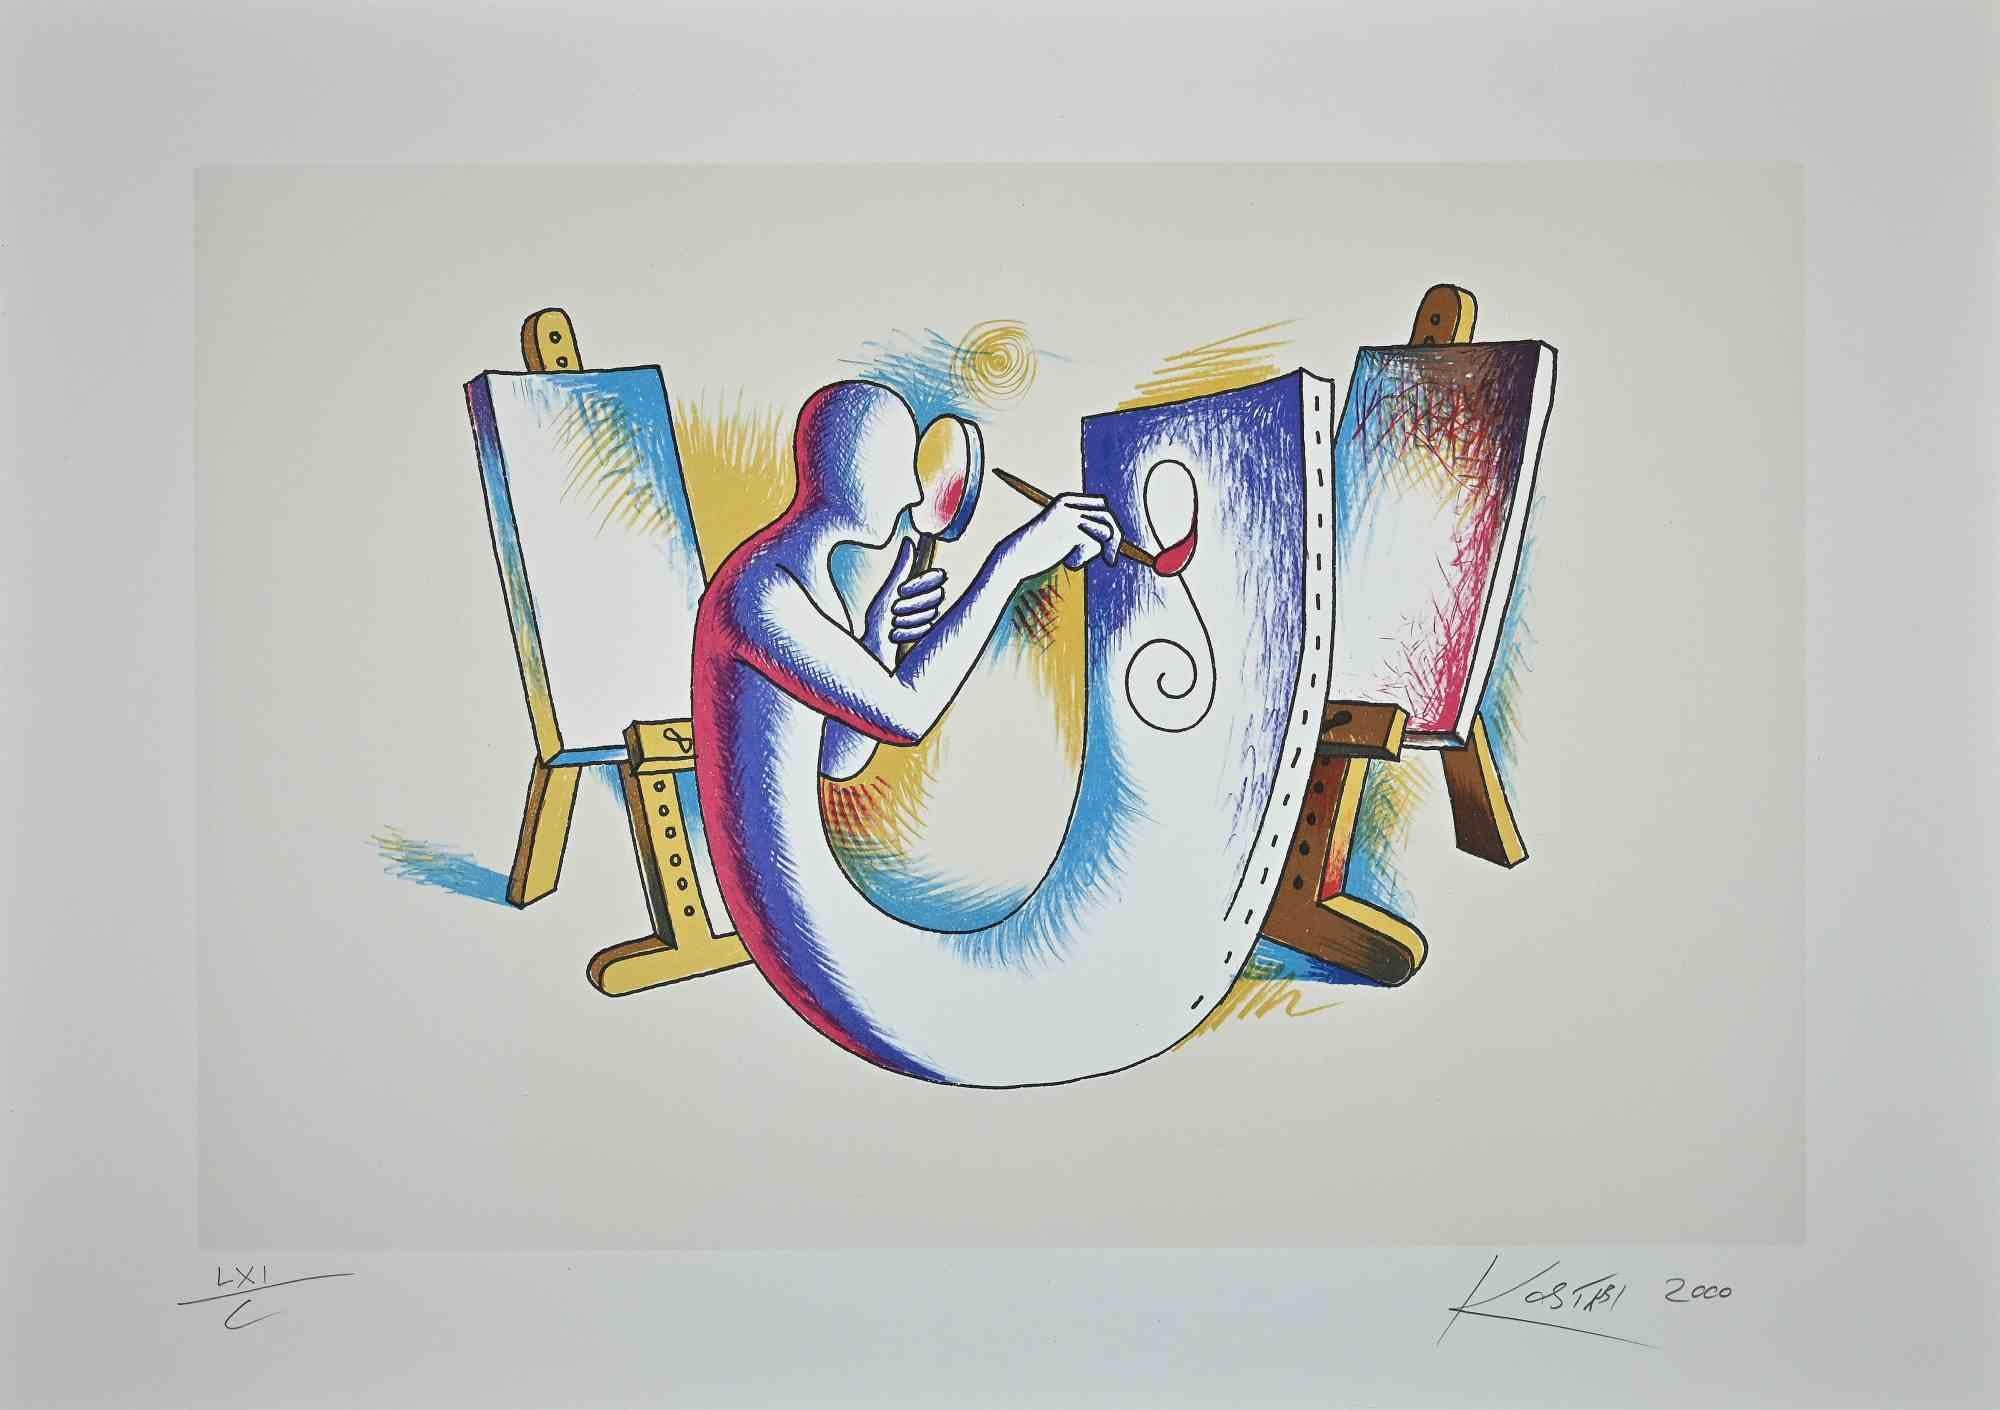 Mark Kostabi Figurative Print - The Painter's Atelier -  Lithograph by M. Kostabi - 2000